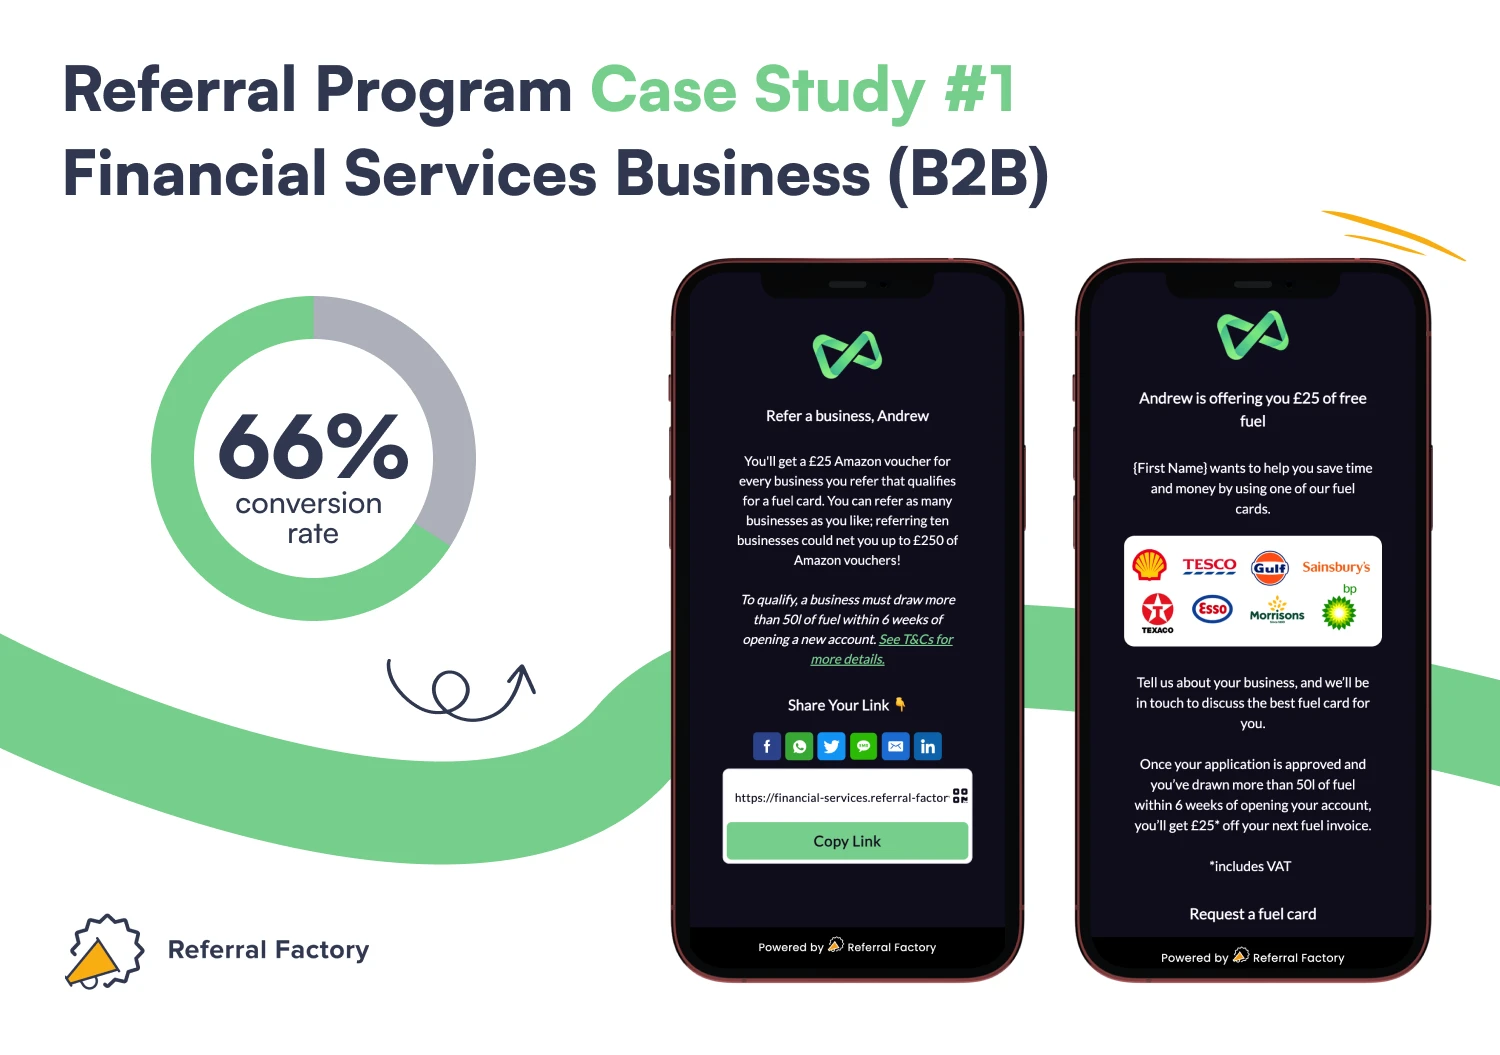 referral program case study financial services business referral factory